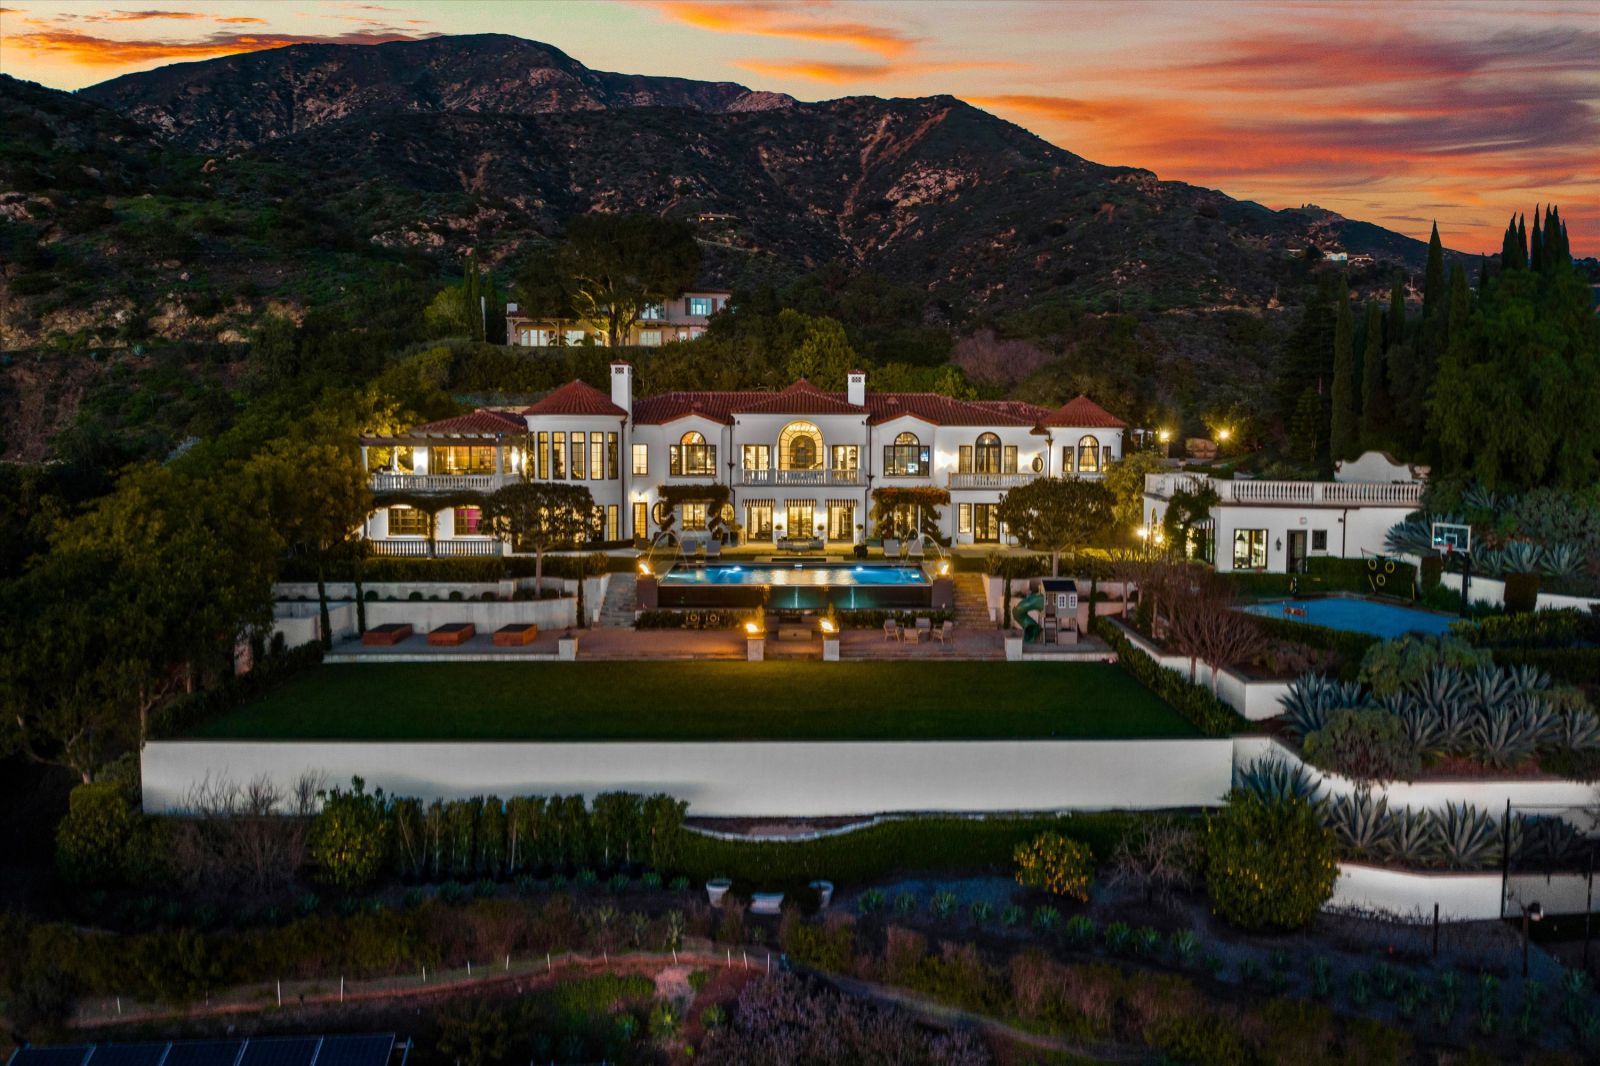 A large Montecito estate with large red tiled roof home against a mountain and sunset backdrop, and a large infinity-edge pool